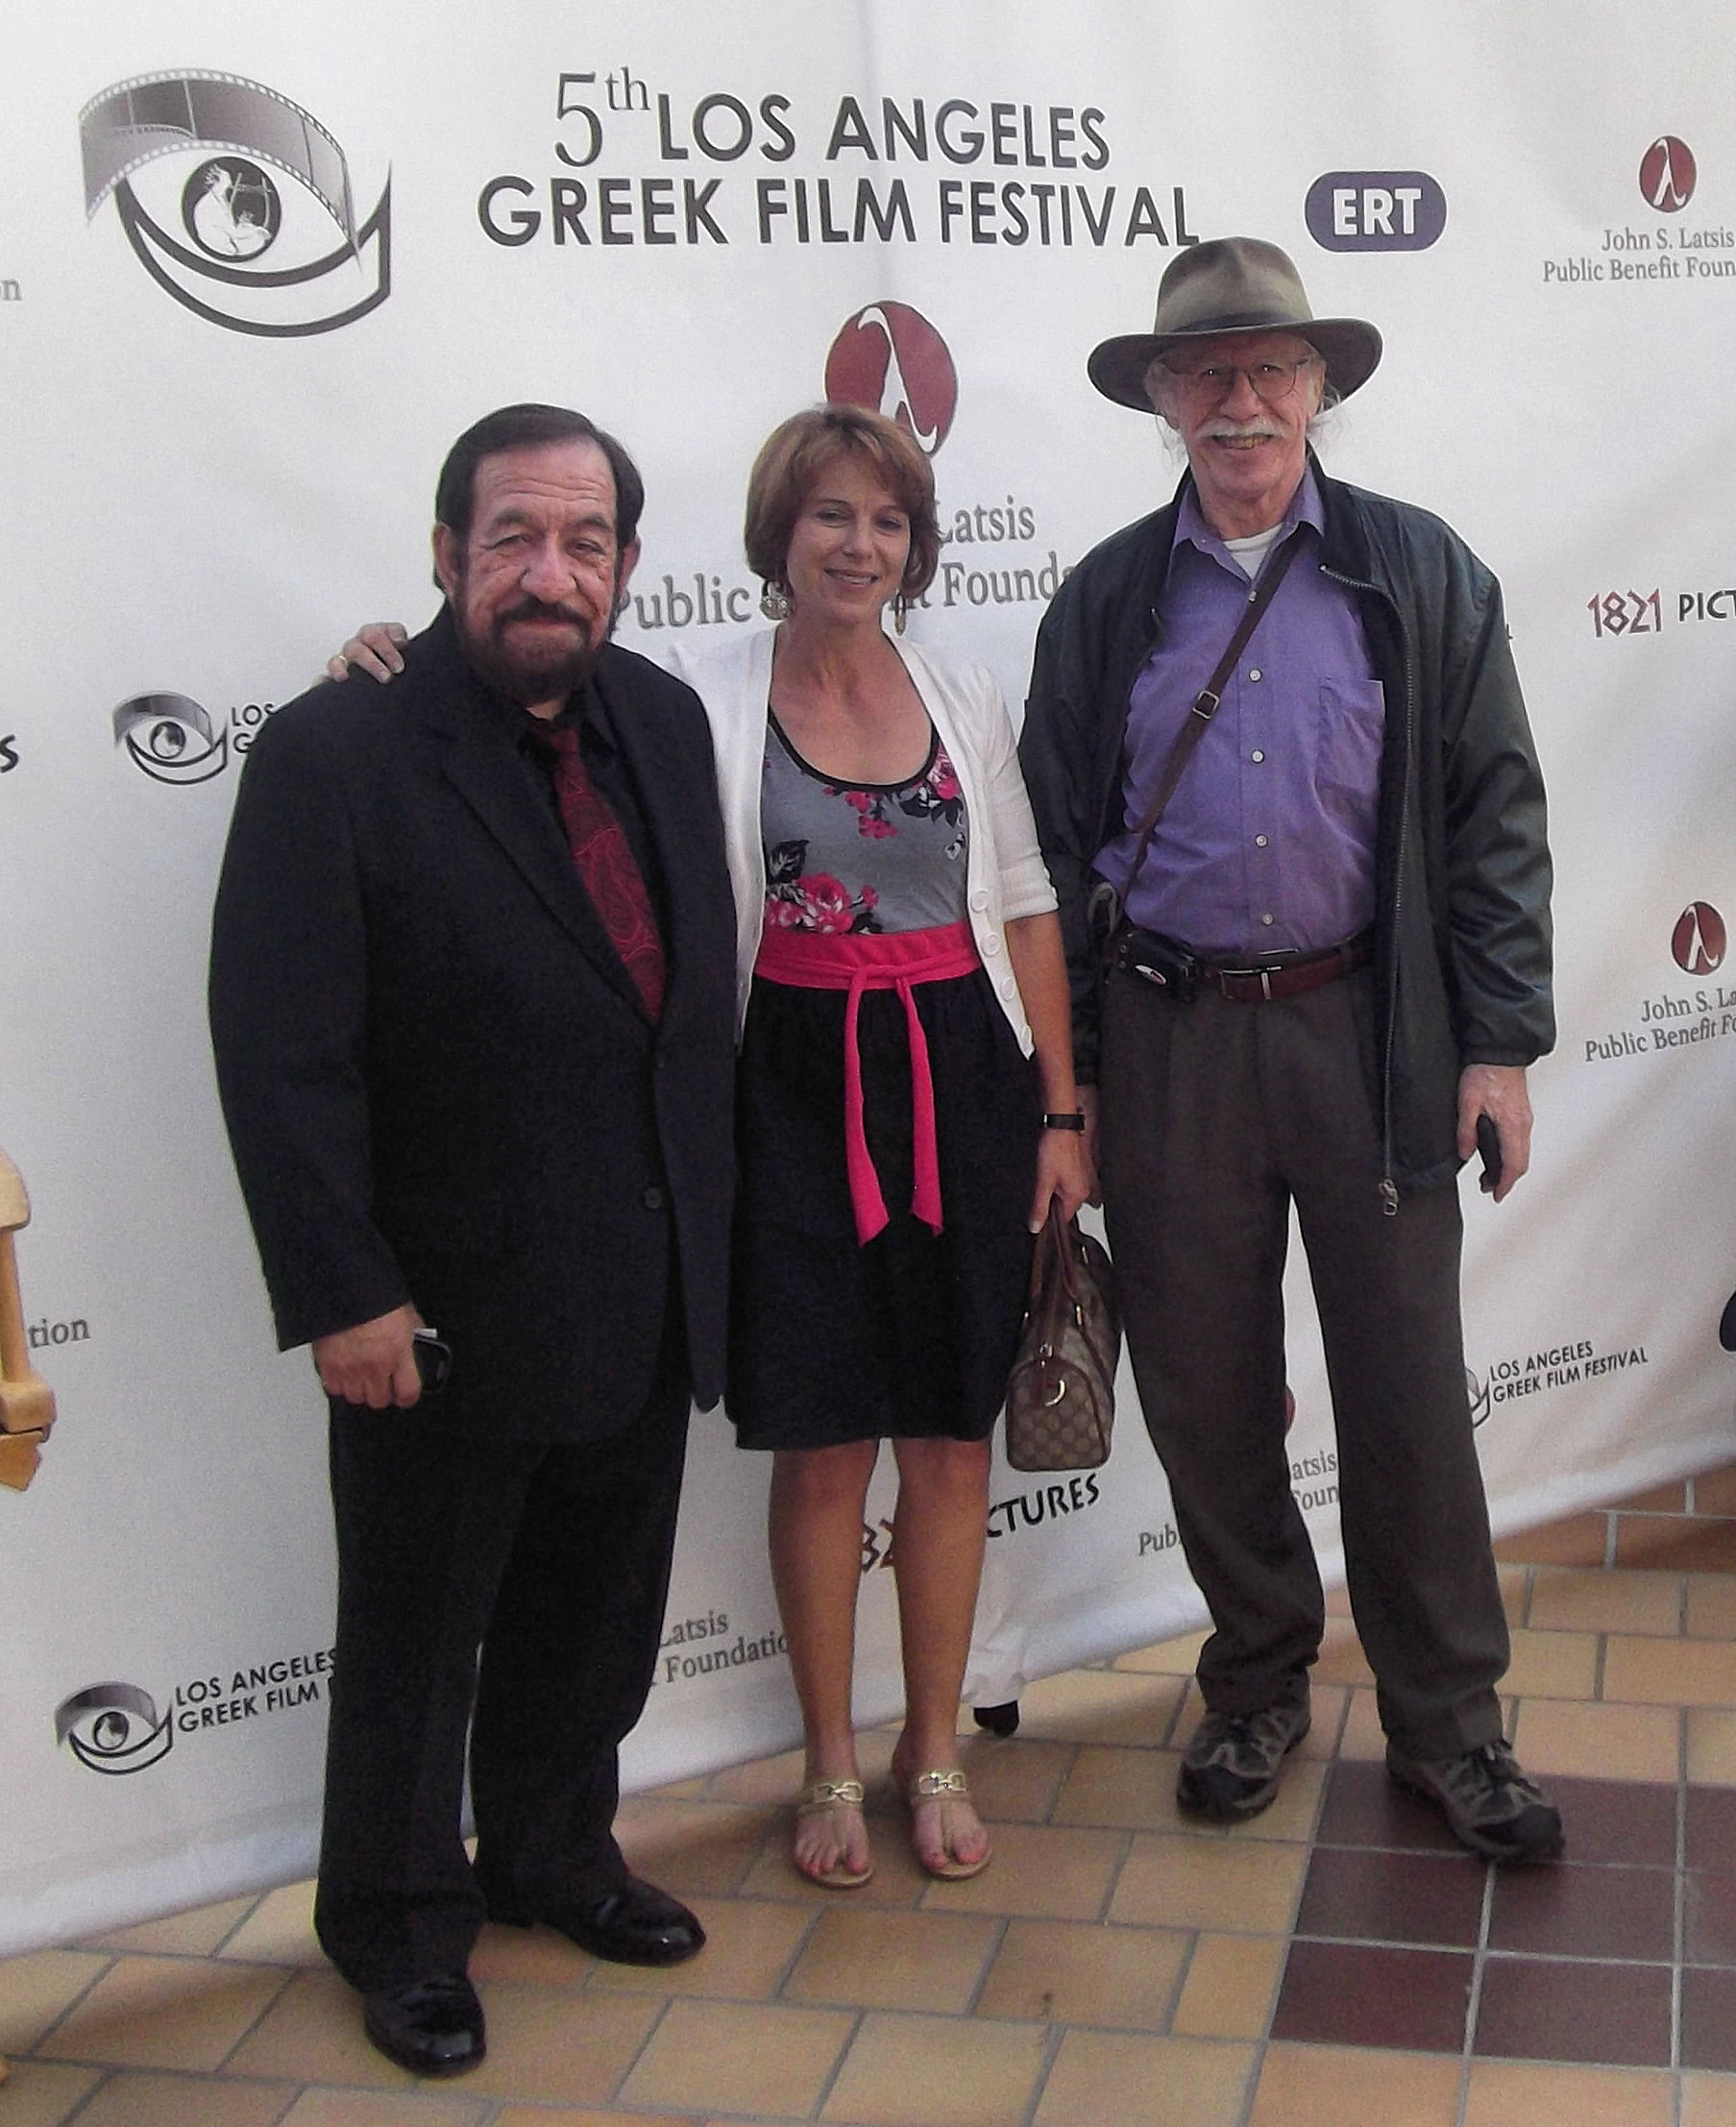 Jesse, Carla Scott/actress, & Gerry Kass/actor at the Los Angeles Greek Film Festival/movie premiere of Without Borders, June 11, 2011.